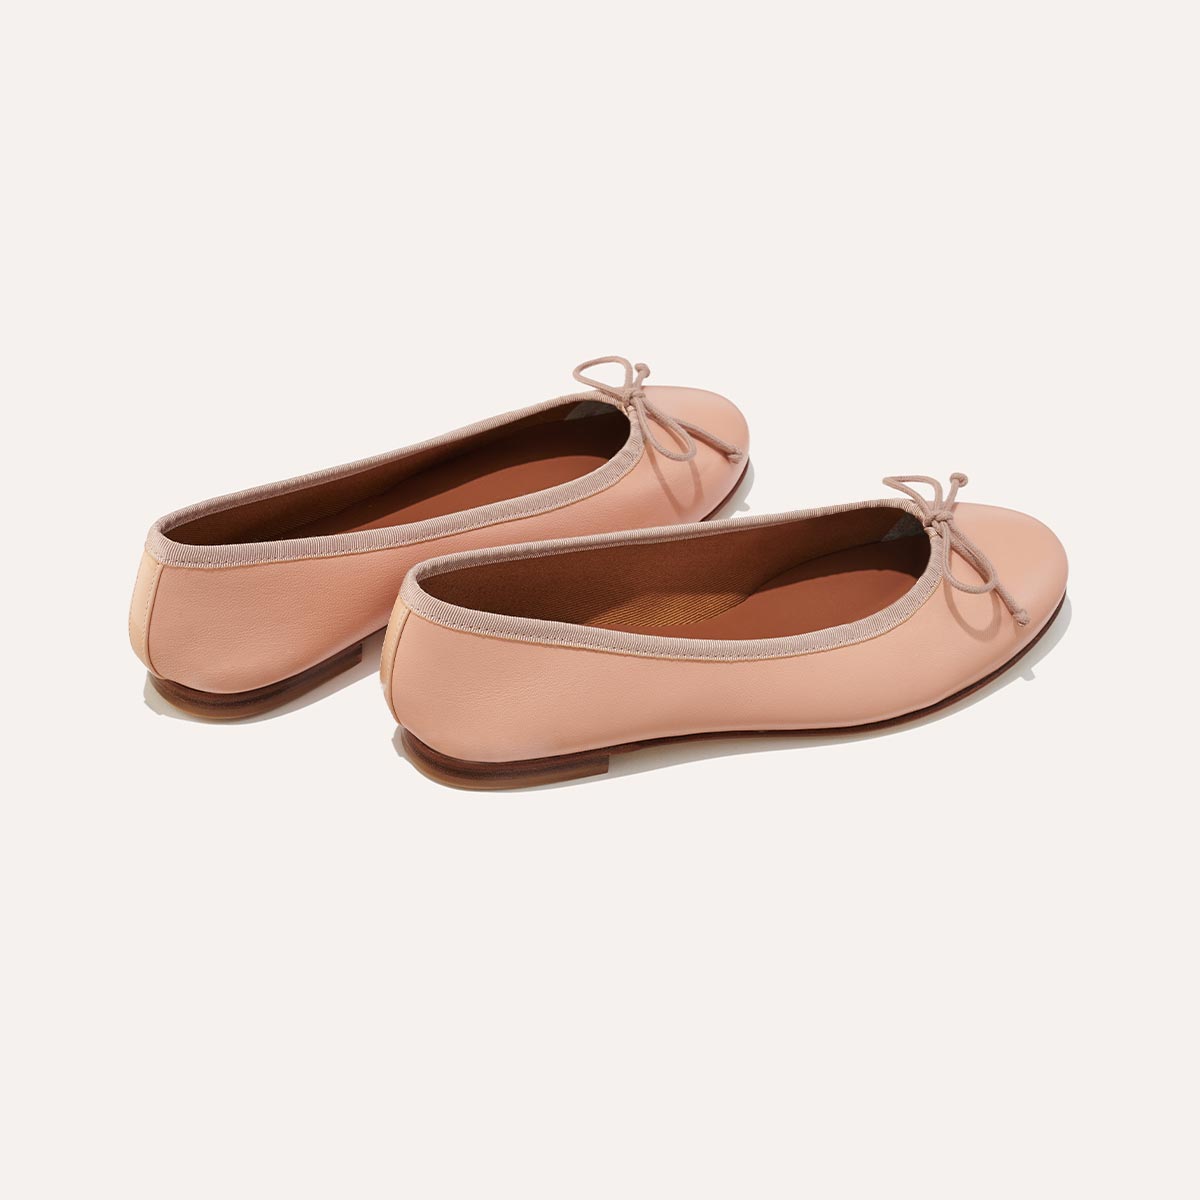 The Demi - Ballet Pink Nappa